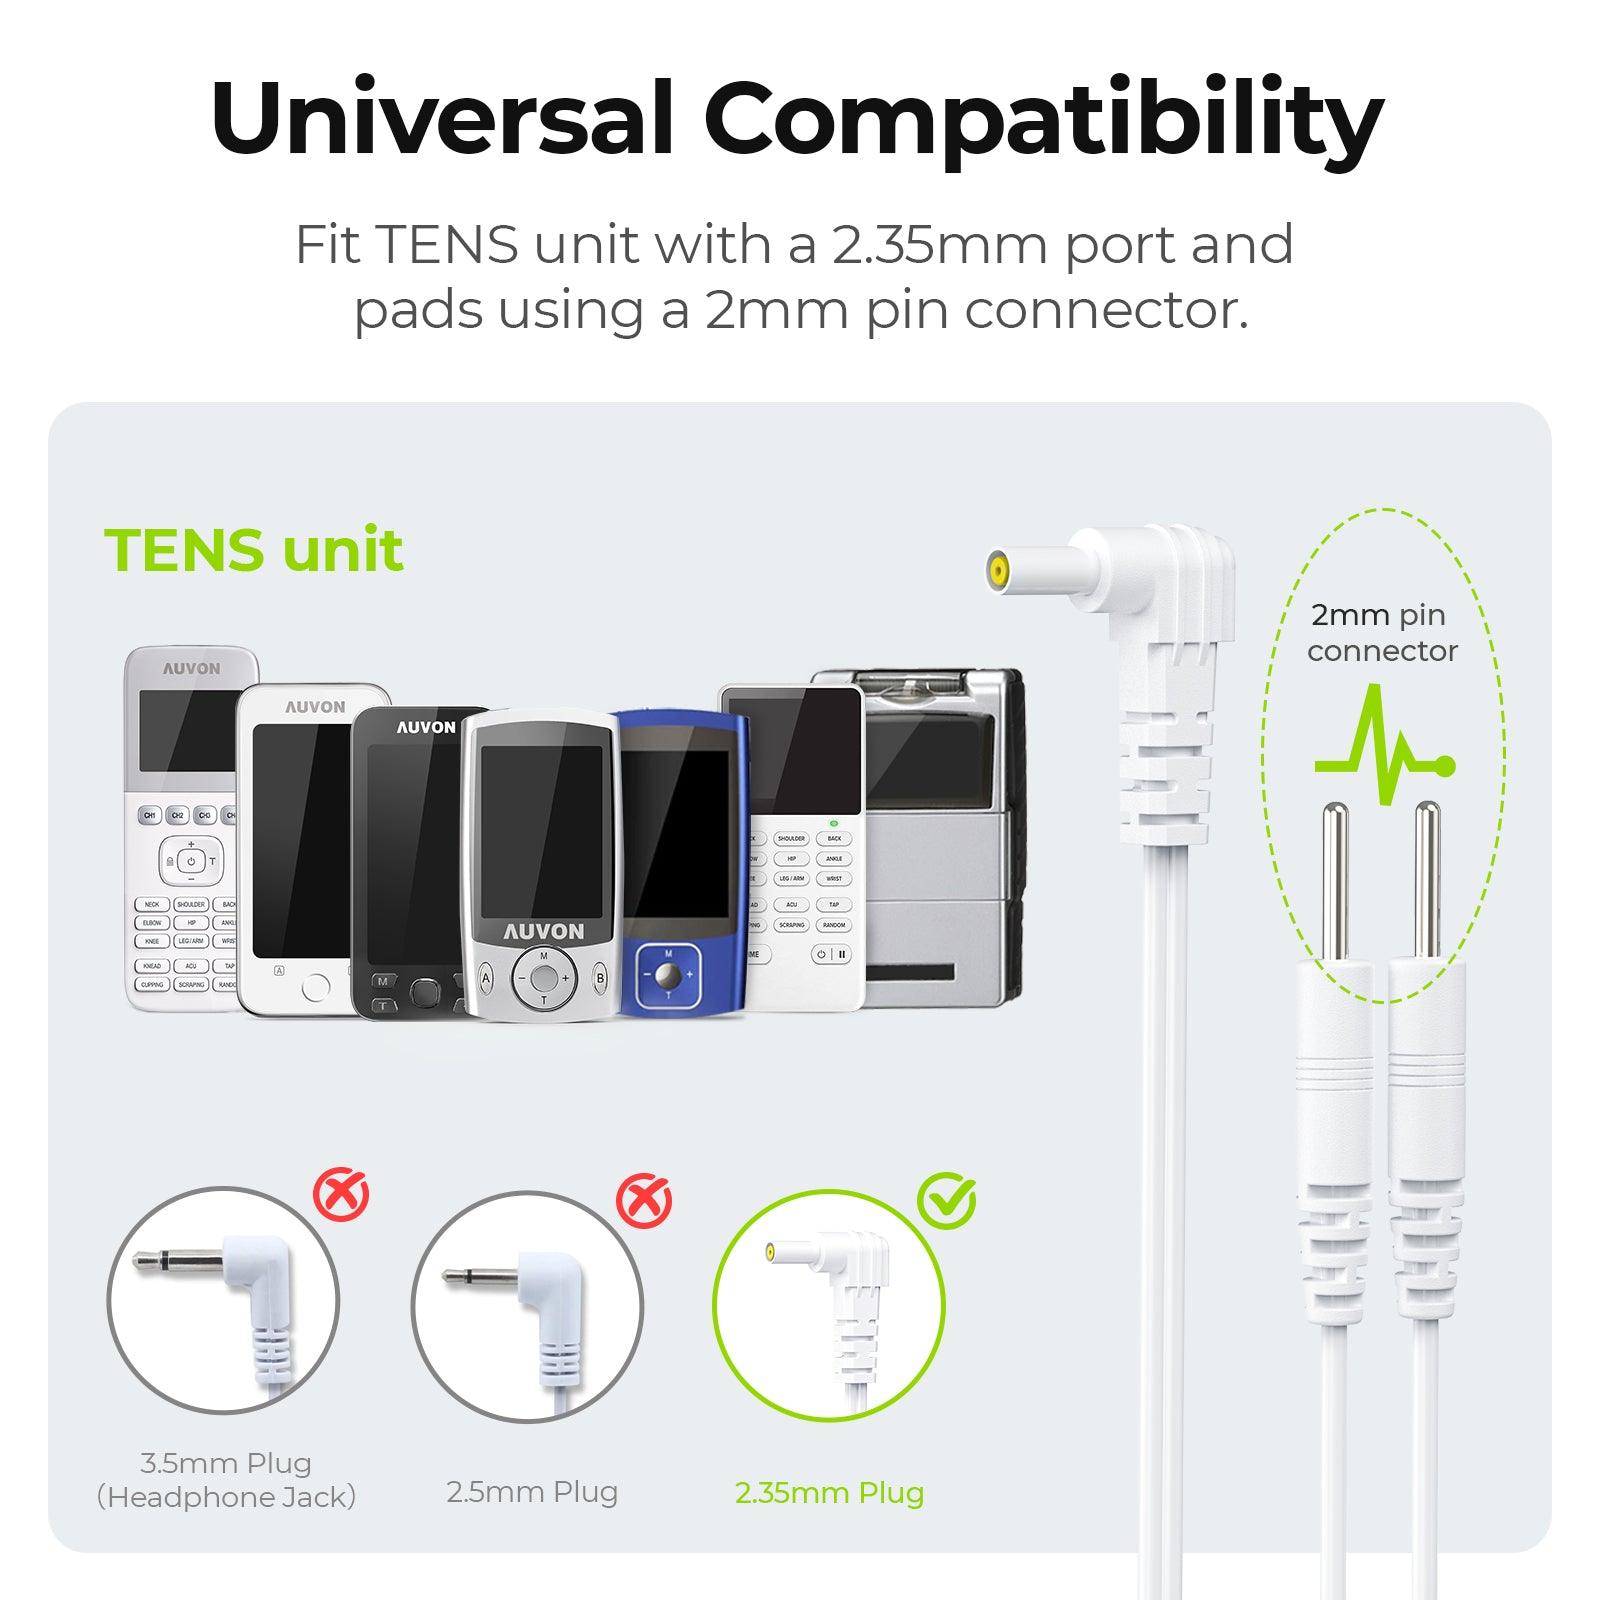 AUVON Durable Lead Wires for TENS EMS Units (2 Pairs), Standard Leads with 40,000+ Bend Lifespan (10X Durability), Compatible with Most TENS Units, EMS, and Other Electrotherapy Stimulation Devices - AUVON